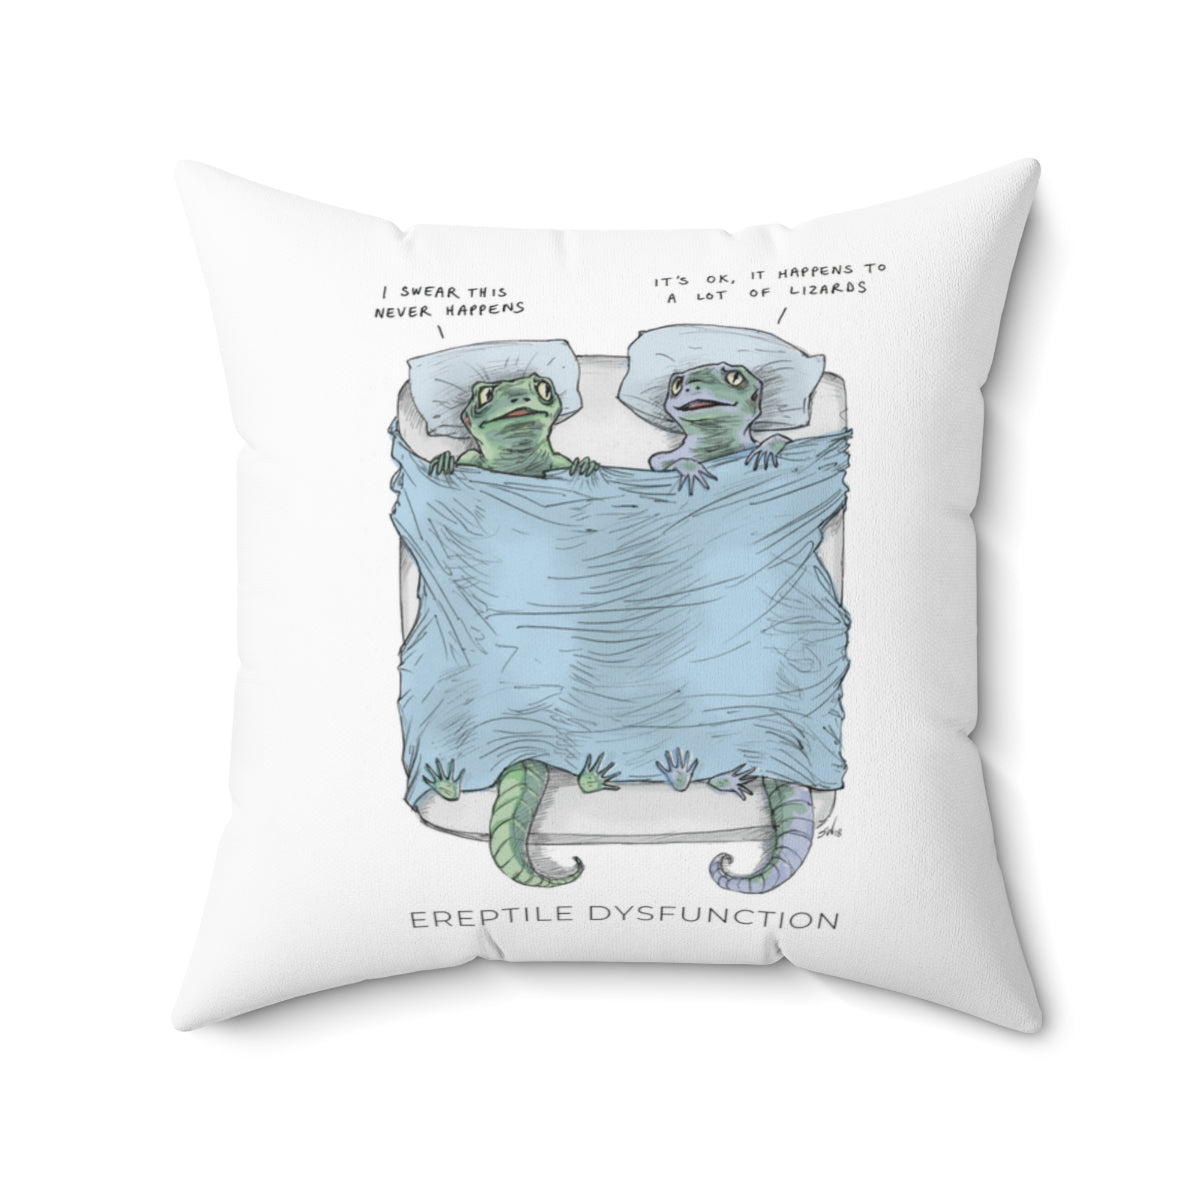 Ereptile Dysfunction | Lizards in Bed | Snarky Throw Pillow | 4 sizes